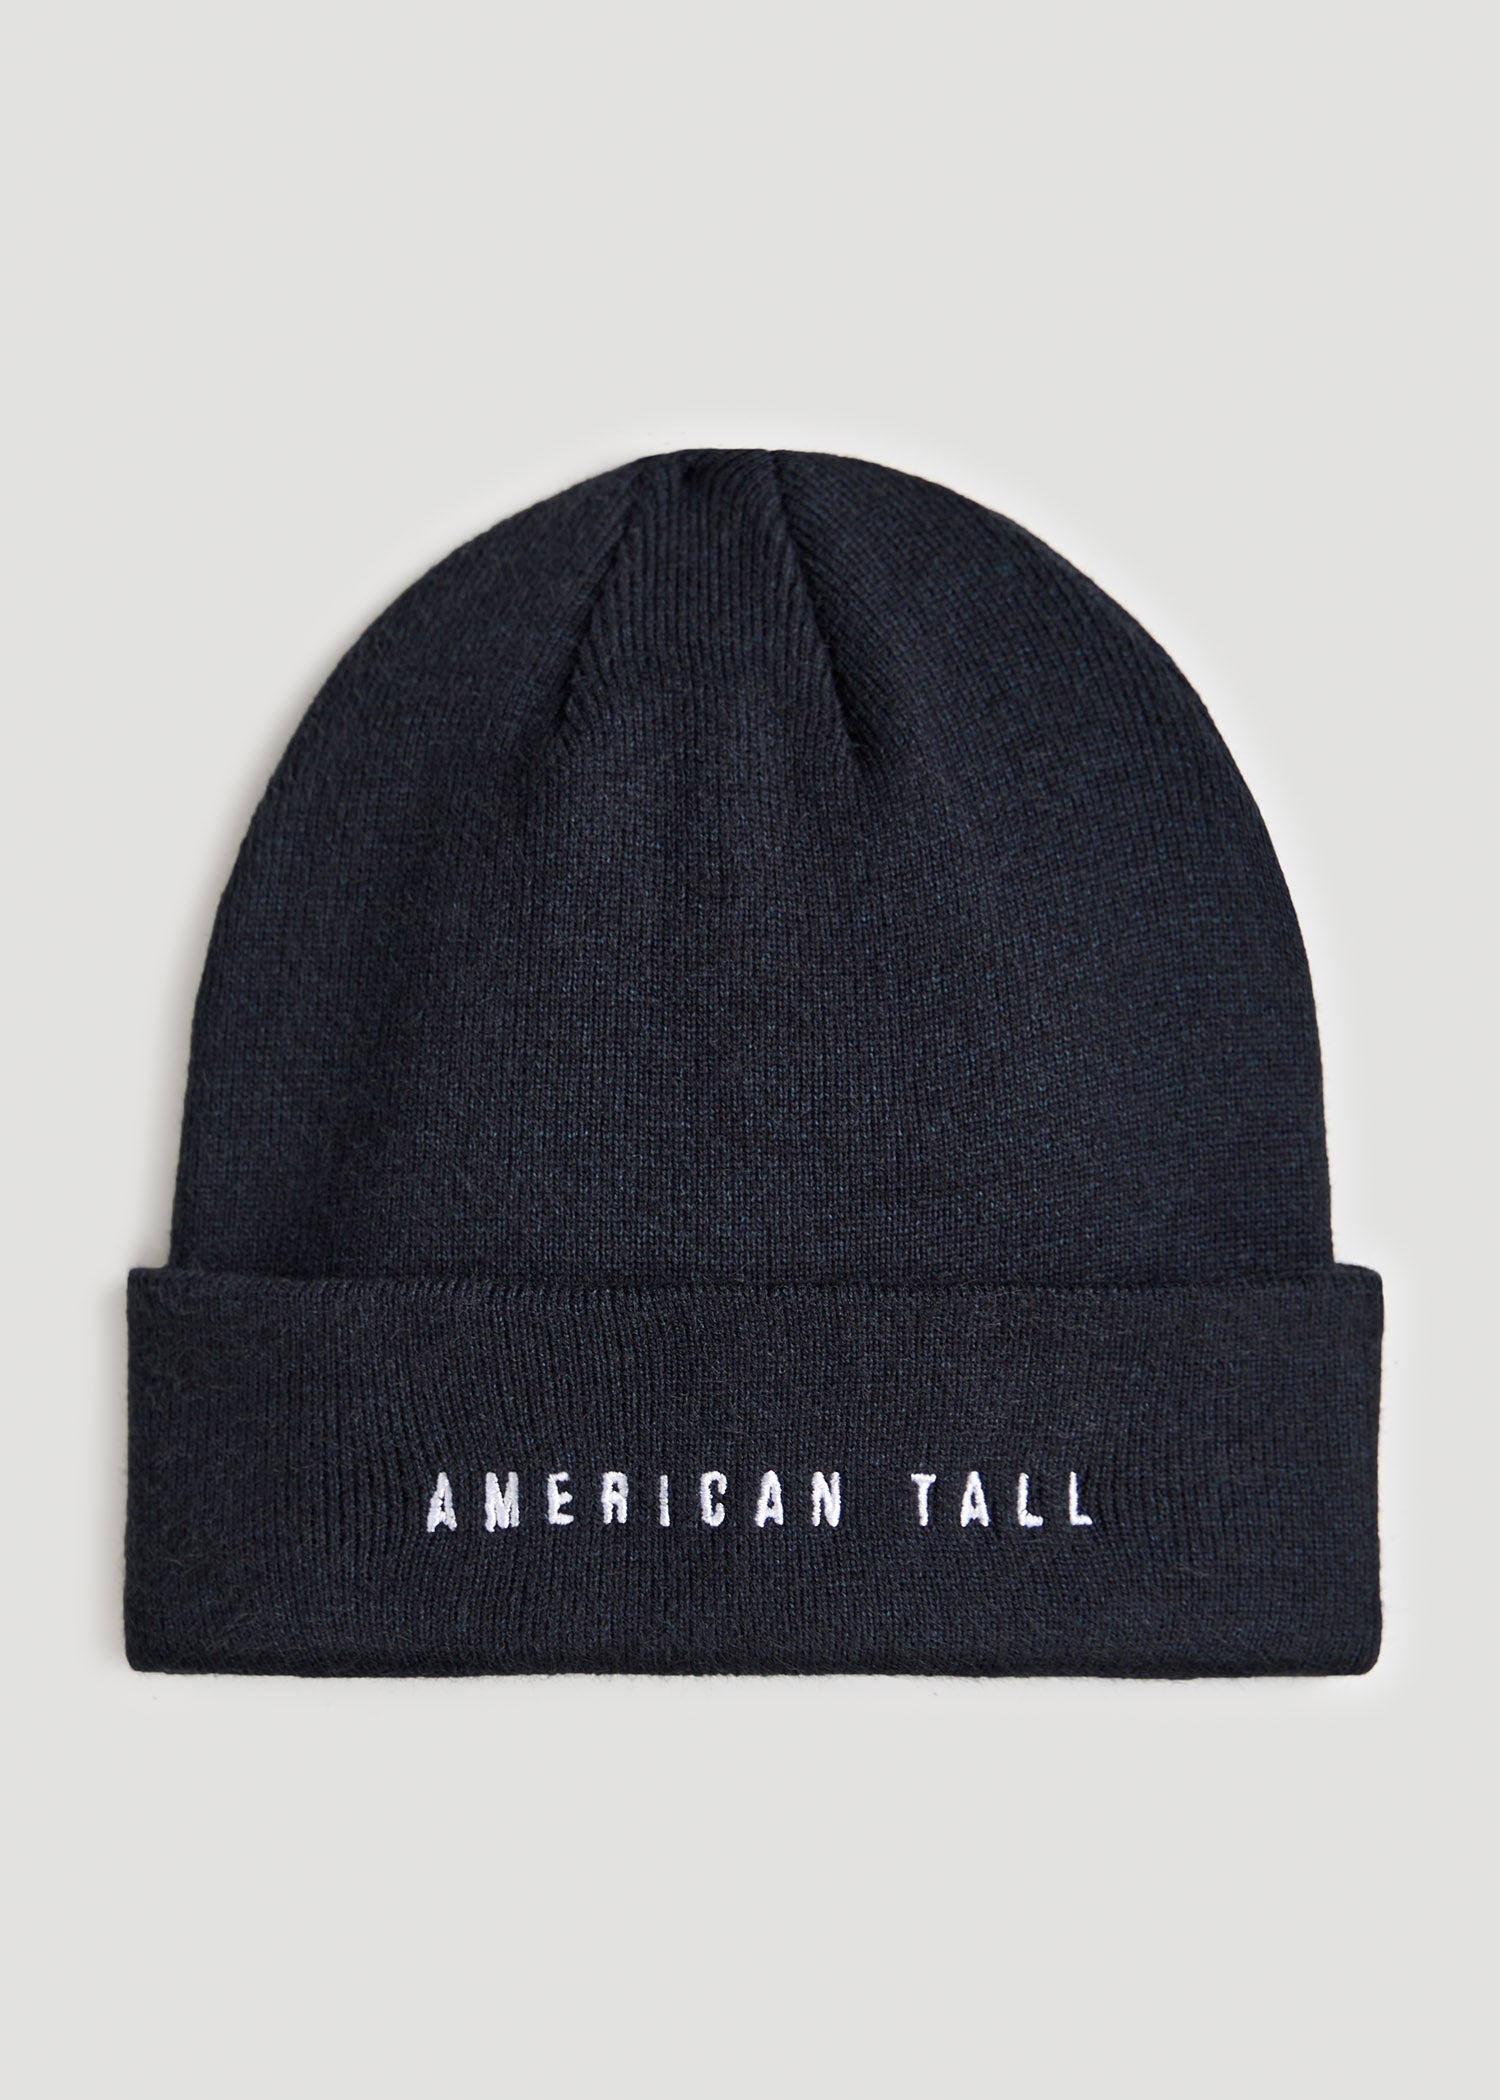    American-Tall-Knit-Beanie-in-Navy-One-Size-Fits-All-Navy-front